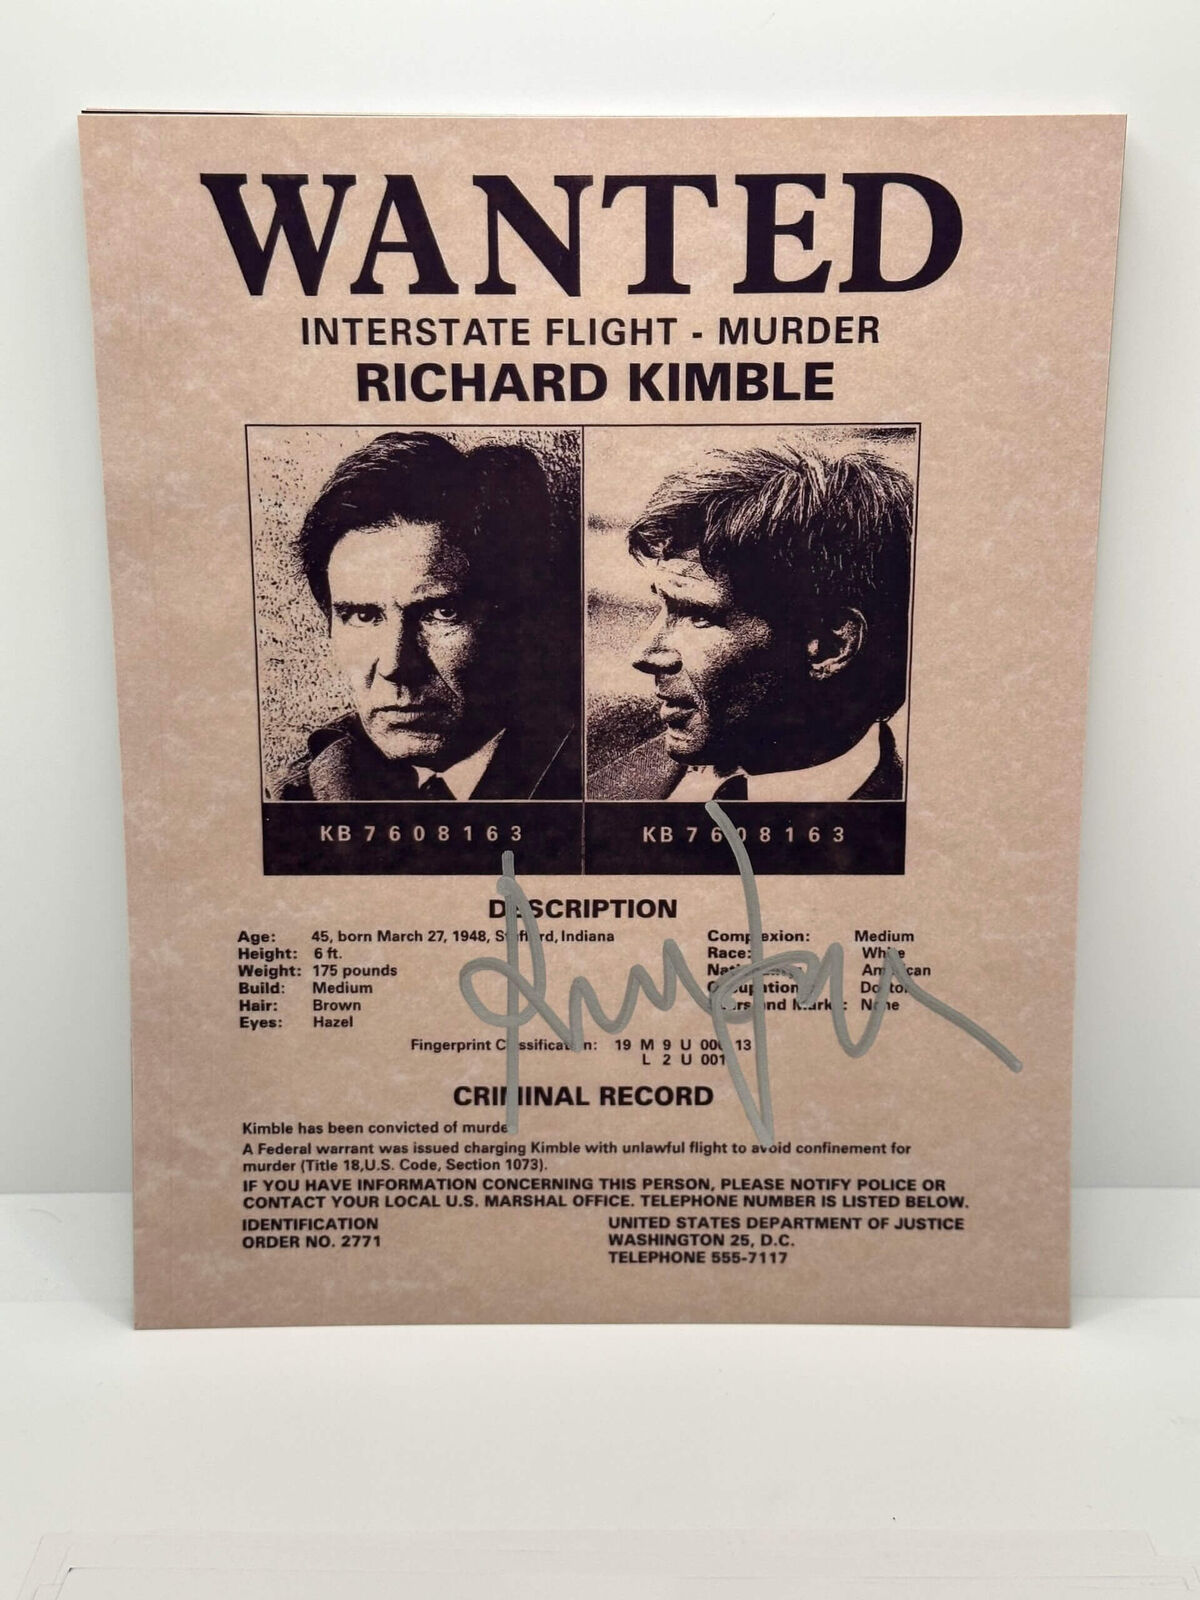 Harrison Ford The Fugitive Wanted Poster Signed Autographed Photo Authentic 8X1